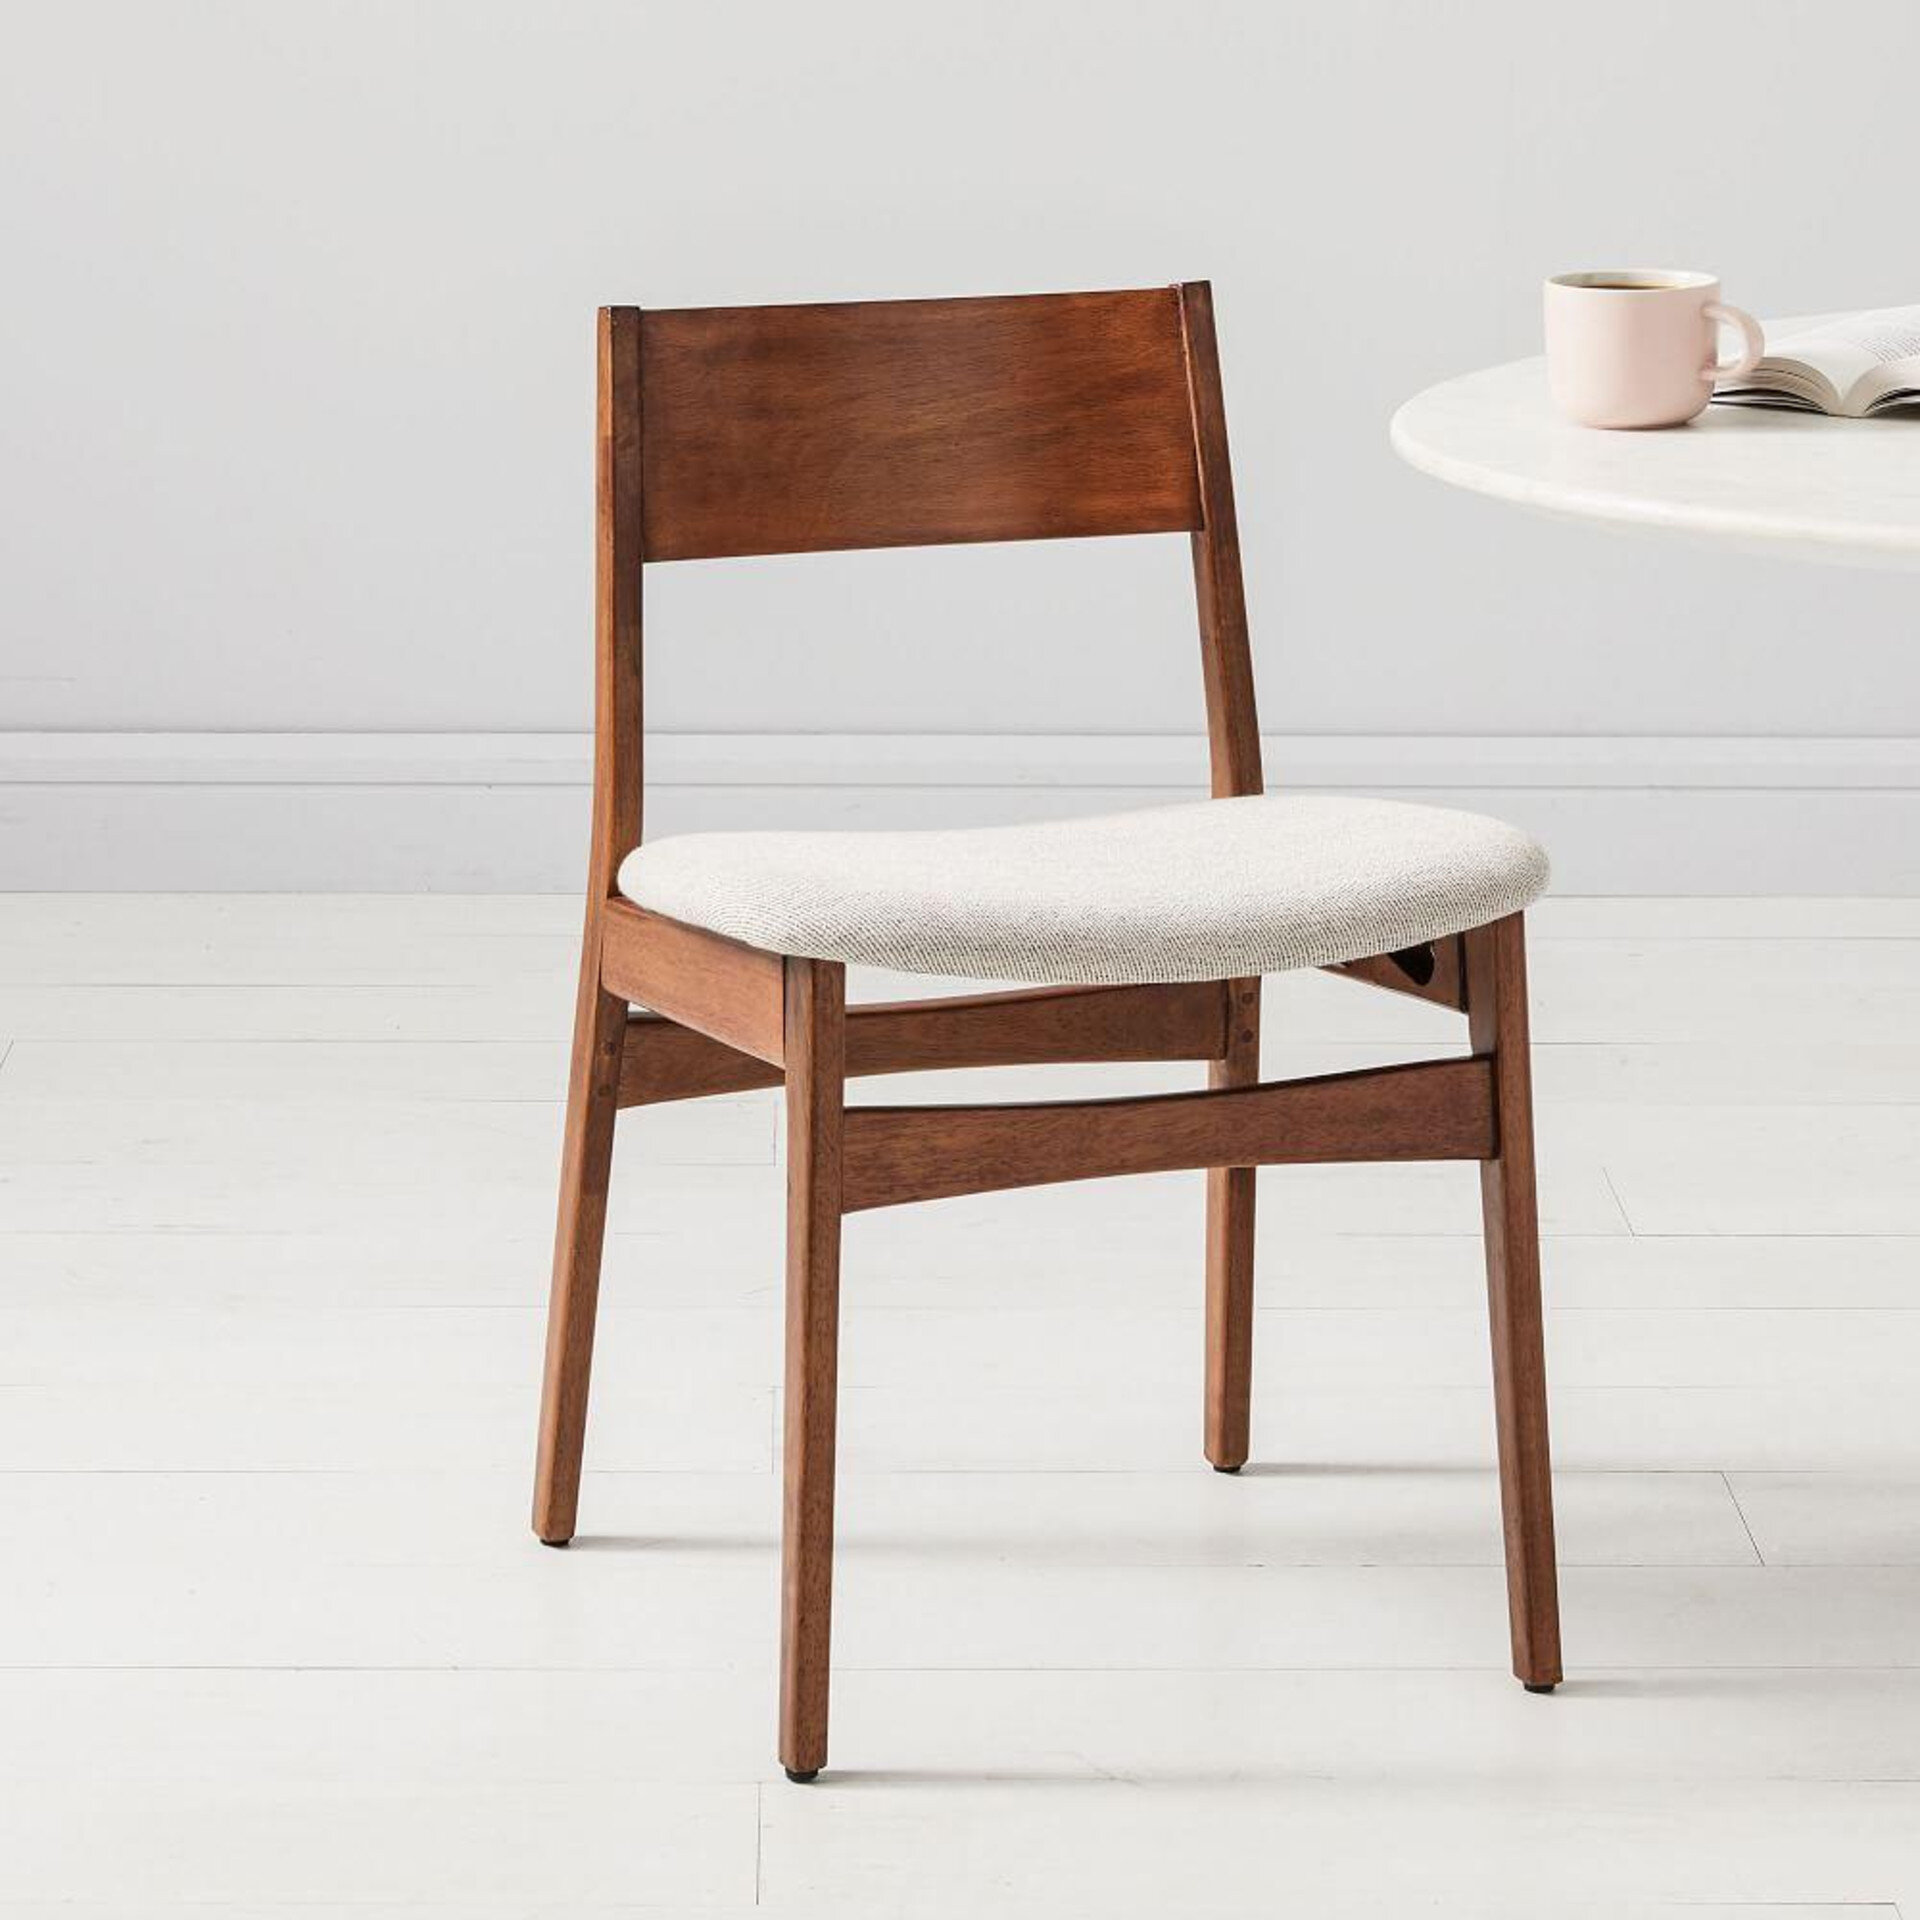 5 stylish dining chairs for under £150 — melanie lissack